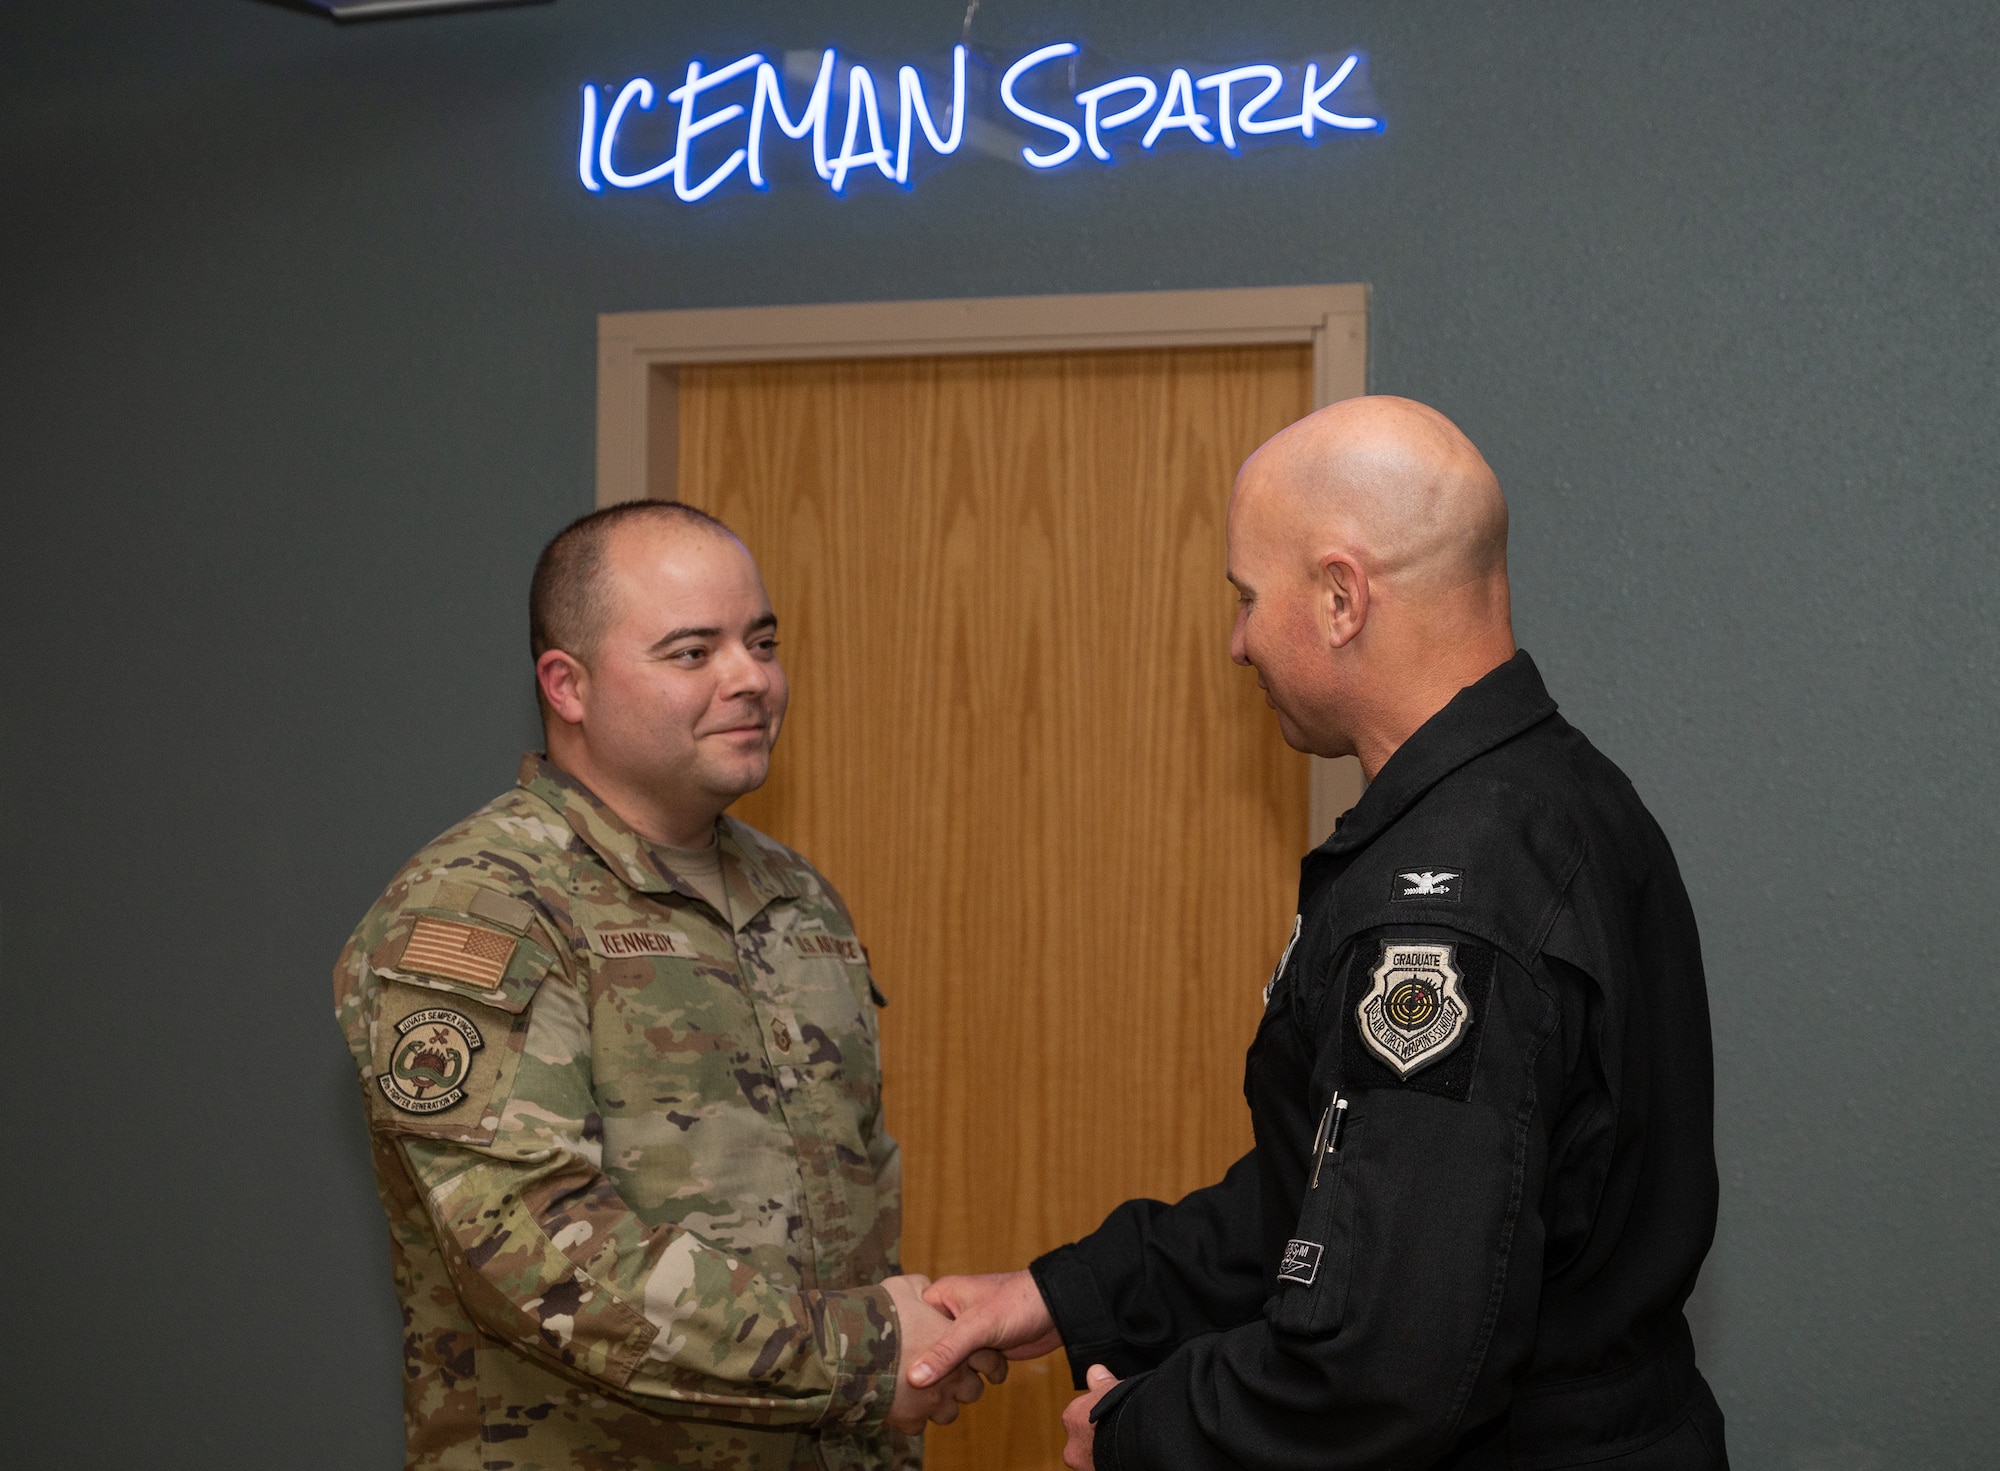 U.S. Air Force Col. David Berkland, 354th Fighter Wing commander, right, coins Master Sgt. Carleton Kennedy, 80th Fighter Generation Squadron production supervisor, at Eielson Air Force Base Alaska, June 9, 2023. While deployed to Eielson in support of RED FLAG-Alaska, Kennedy, along with the 80th FGS Director of Operation Capt. Sung Woo Suh, were recognized for saving an infant, father and dog from drowning and hypothermia when their kayak capsized in Chena Lake Recreation Area, Alaska on June 3, 2023. (U.S. Air Force photo by Staff Sgt. Danielle Sukhlall)